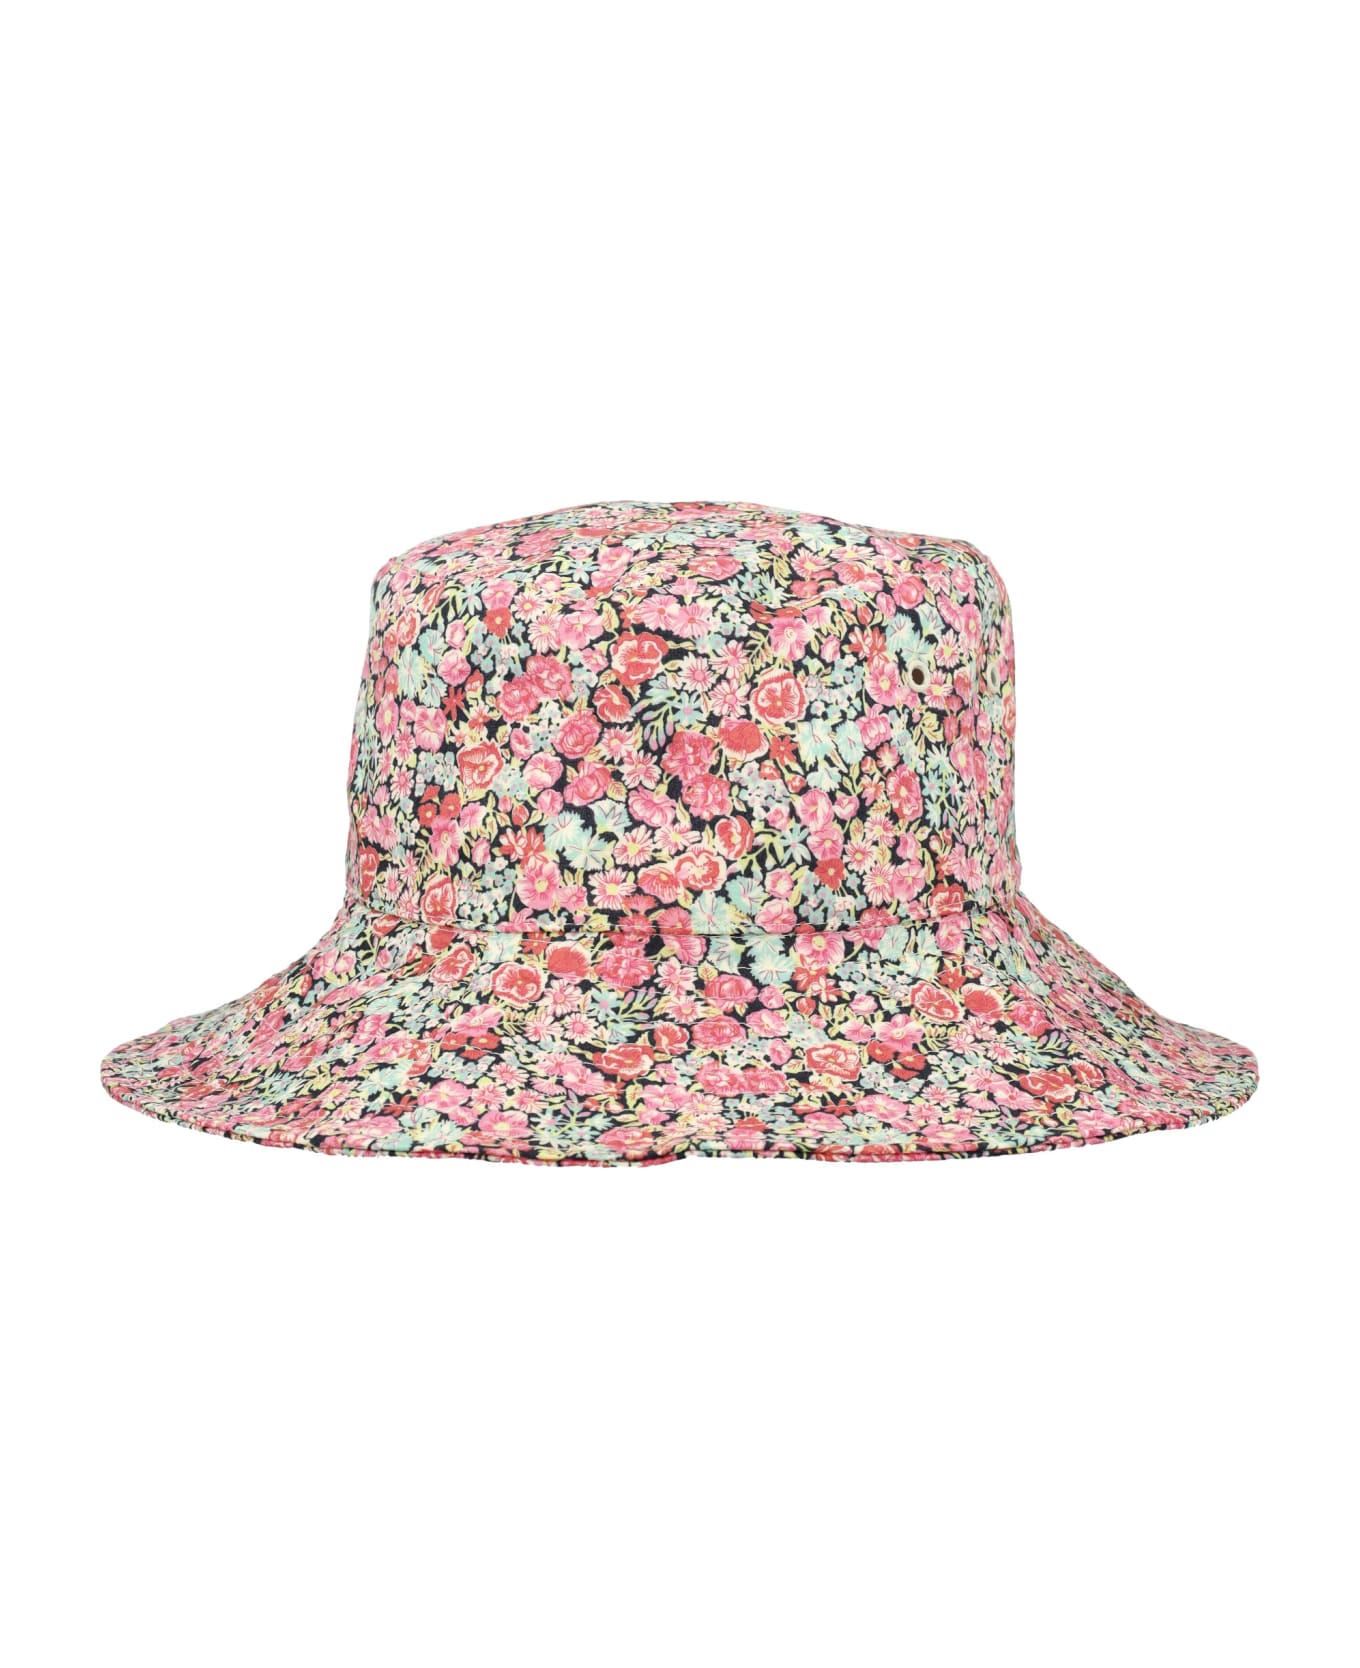 Bonpoint Faye Hat - FLOWERS CORAL アクセサリー＆ギフト